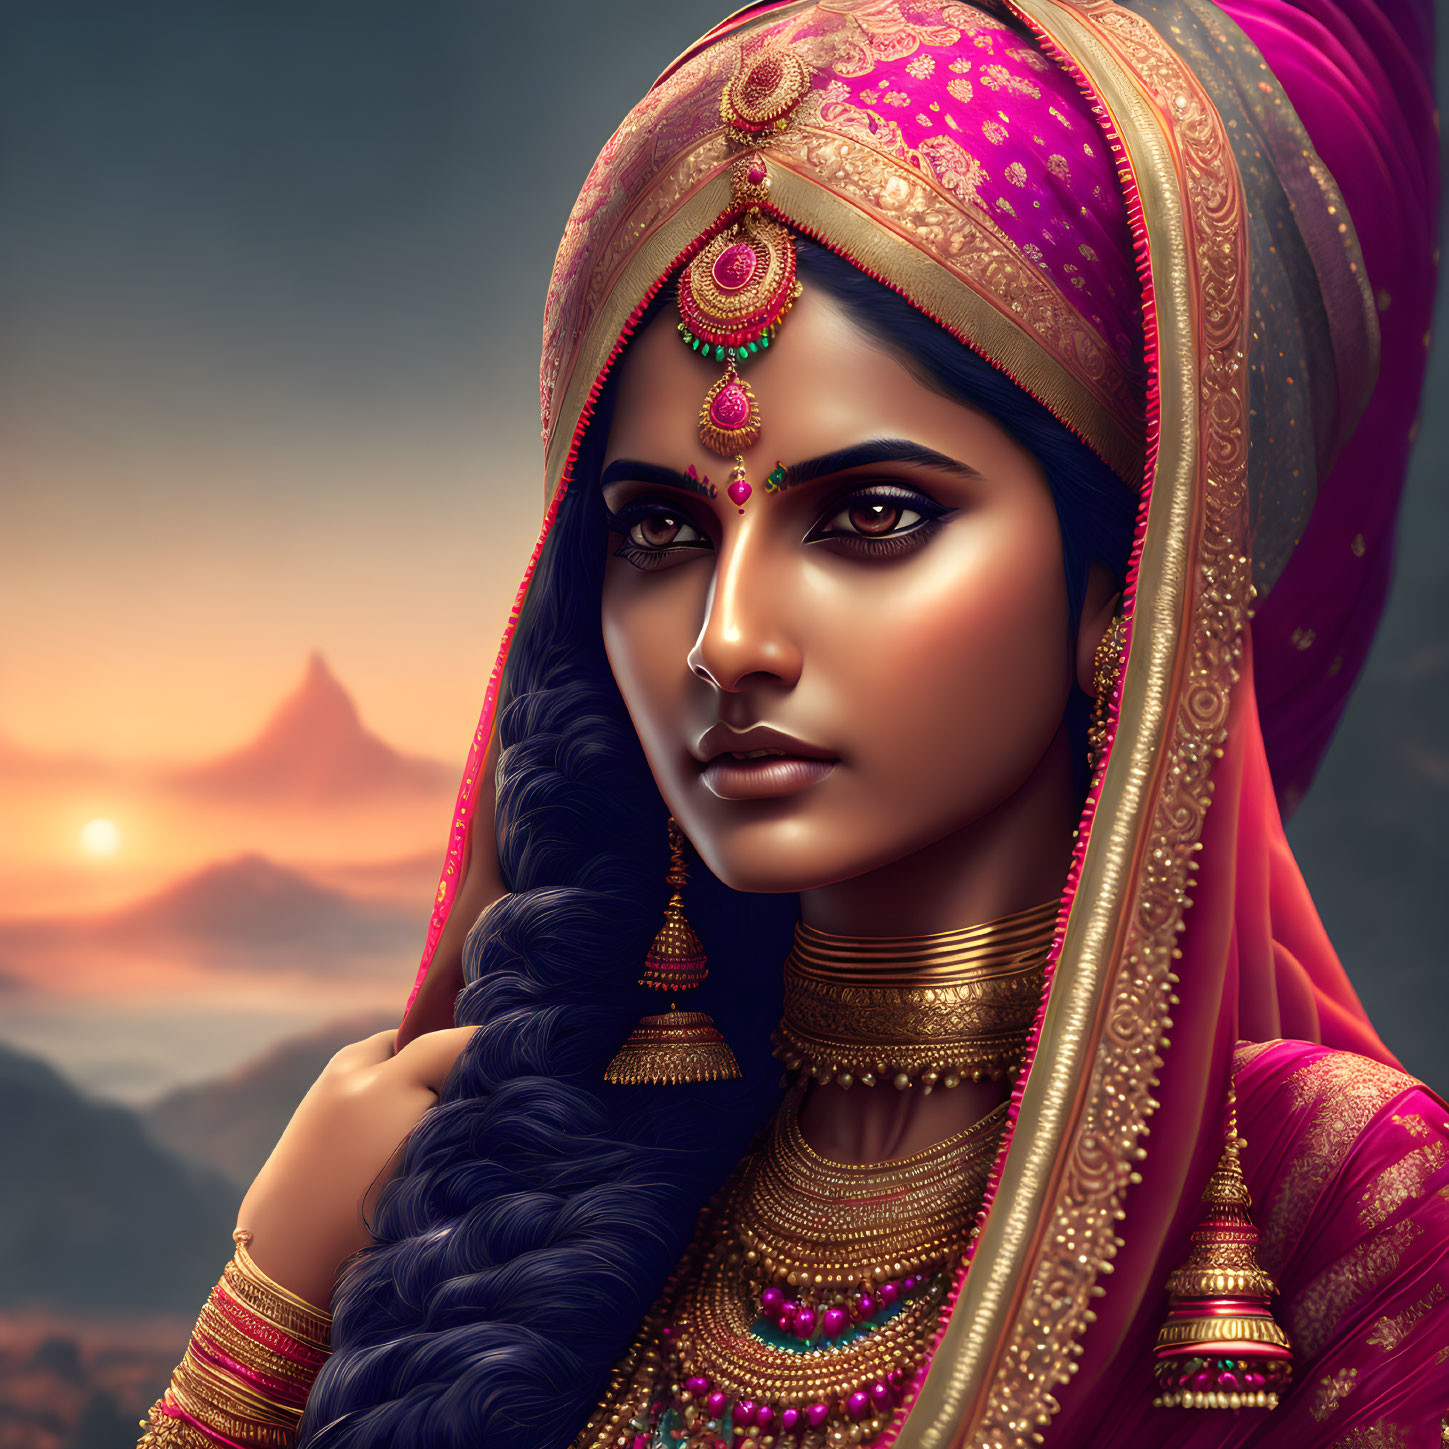 Traditional Indian attire woman with sunset and mountain